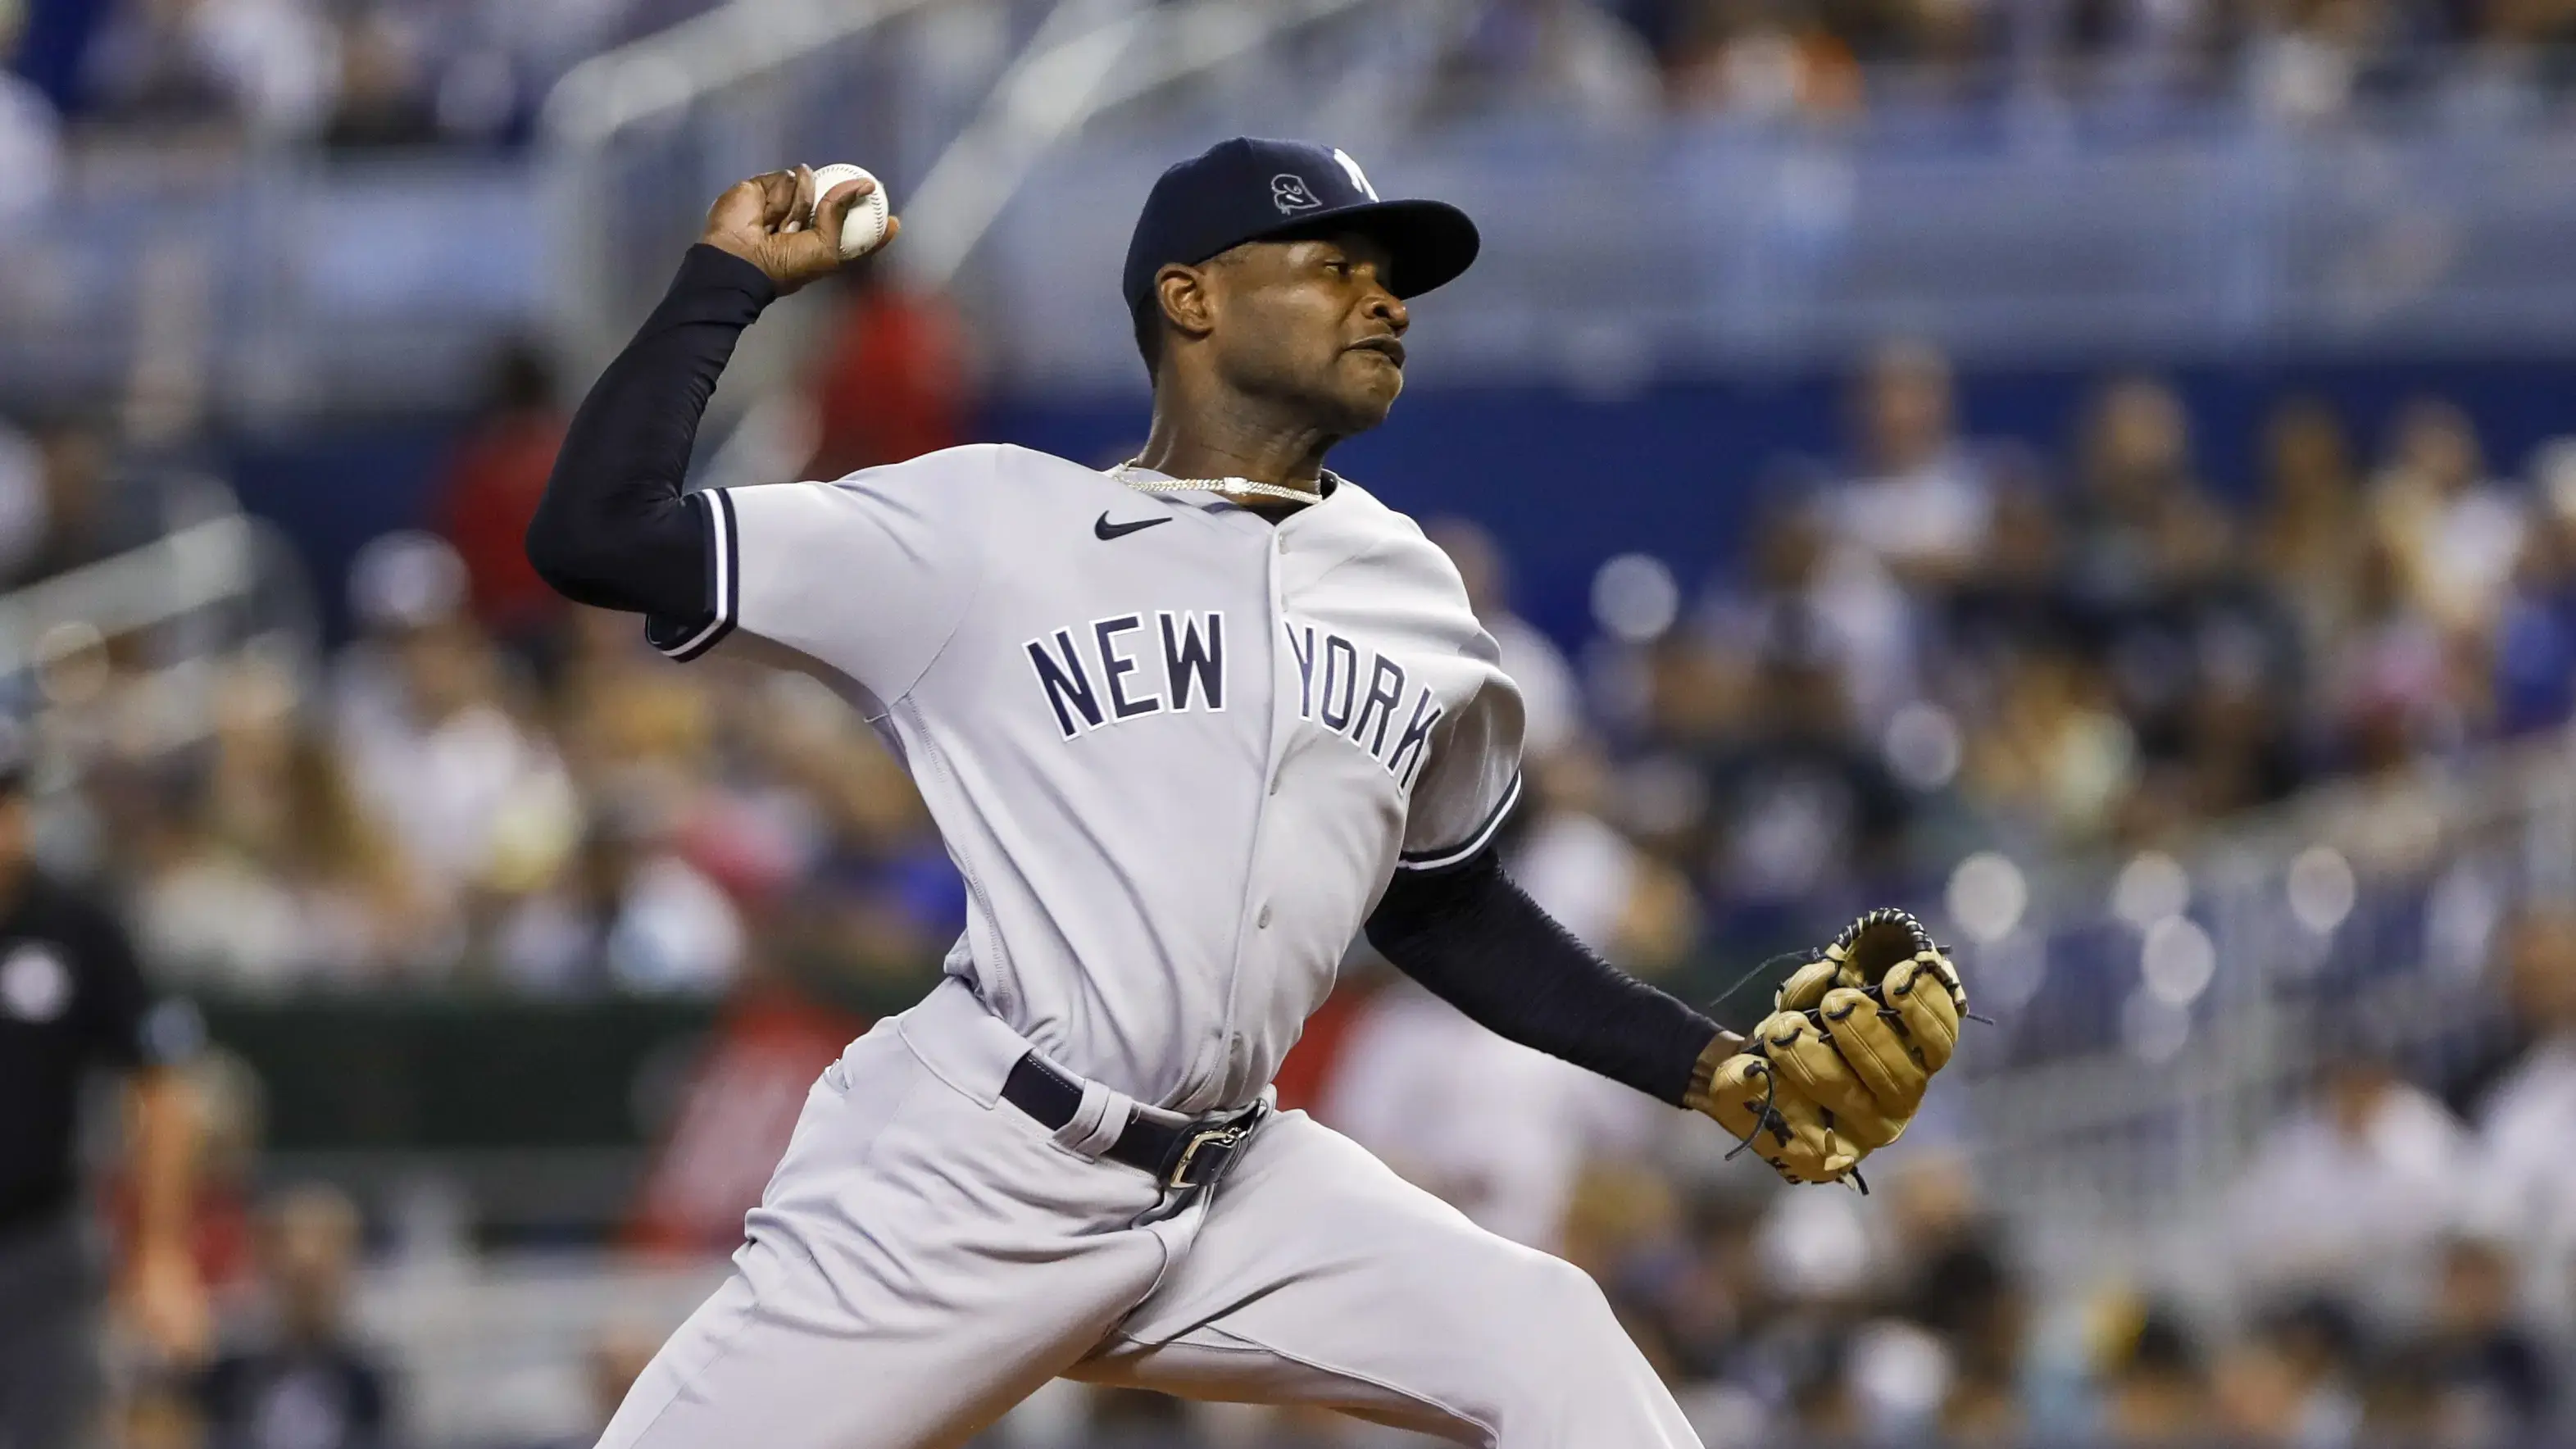 Jul 31, 2021; Miami, Florida, USA; New York Yankees starting pitcher Domingo German (55) delivers pitch during the first inning against the Miami Marlins at loanDepot Park. Mandatory Credit: Sam Navarro-USA TODAY Sports / © Sam Navarro-USA TODAY Sports